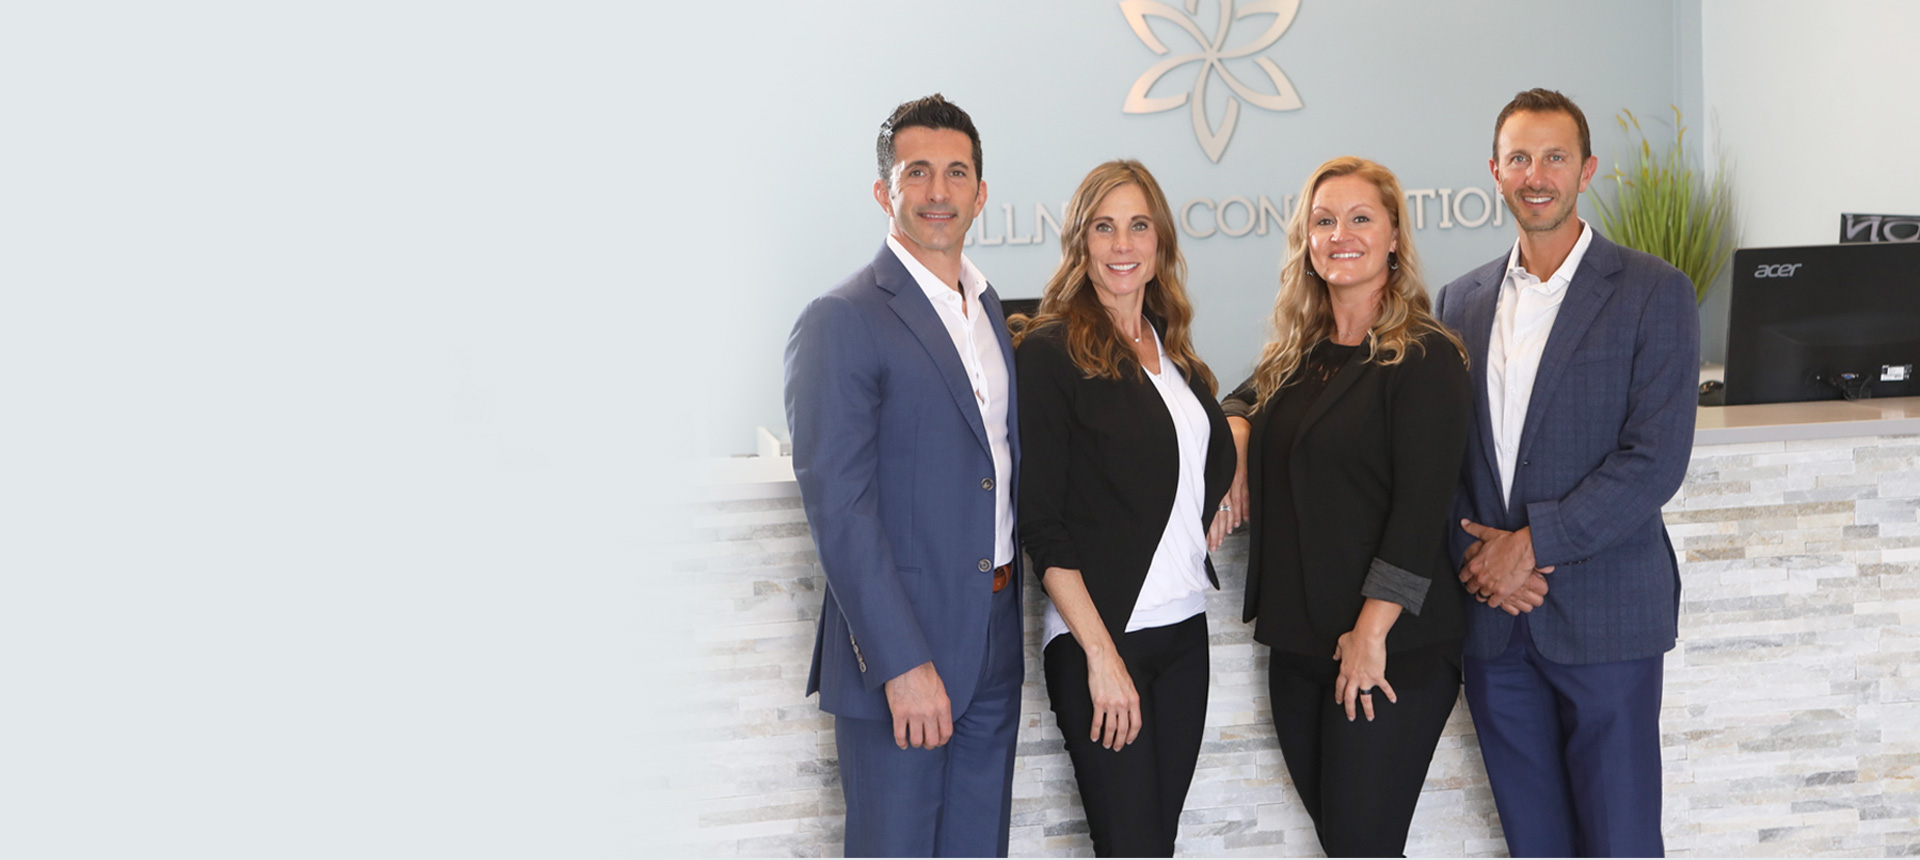 The Wellness Connection team